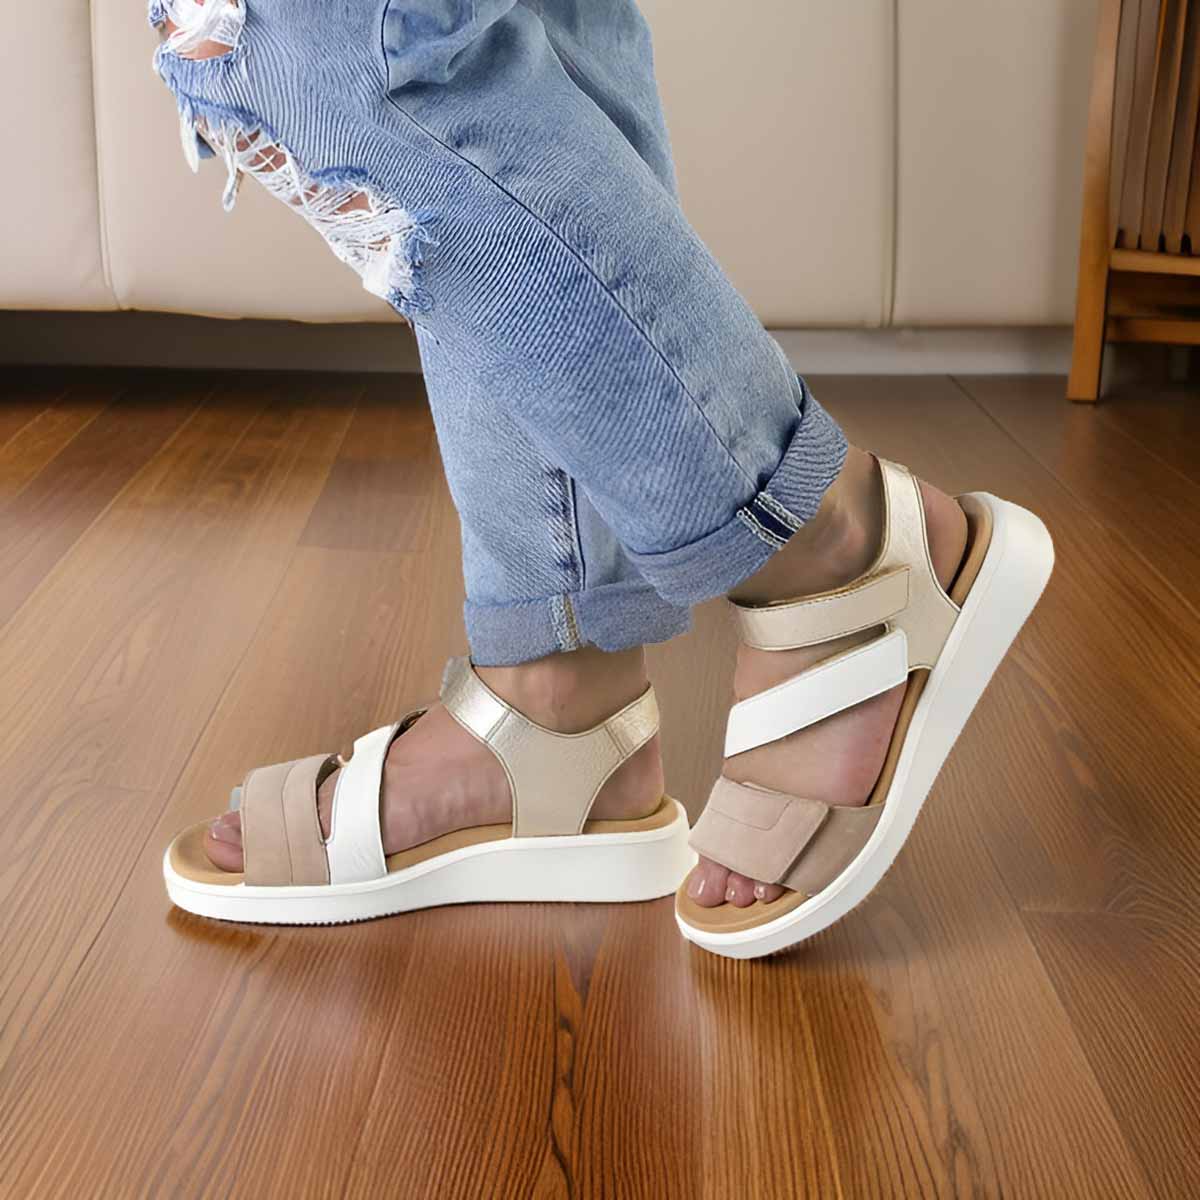 Ara Beige, White, and Gold Sandals with Wedge Heel and Adjustable Velcro Straps